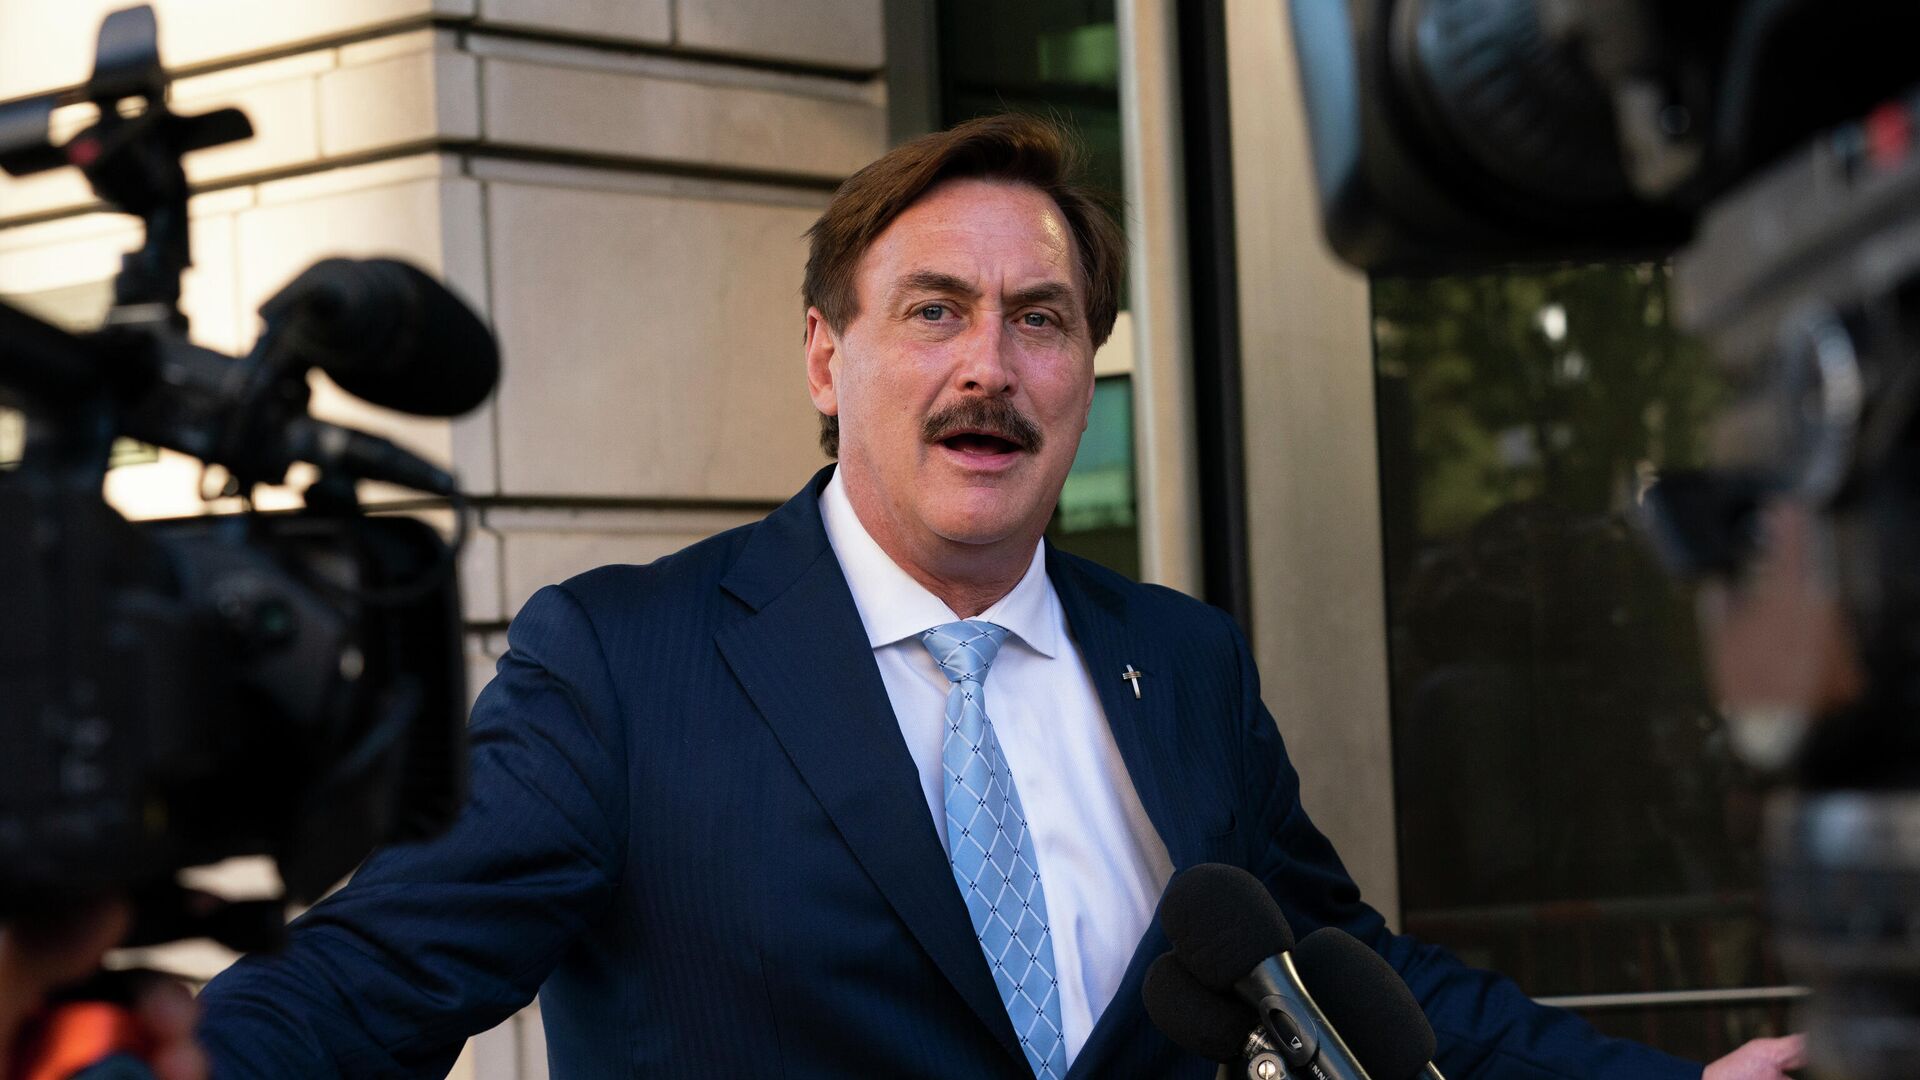 MyPillow chief executive Mike Lindell, speaks to reporters outside federal court in Washington, Thursday, June 24, 2021. A federal judge on Thursday appeared skeptical of arguments to dismiss a defamation lawsuit filed by Dominion Voting Systems over baseless 2020 election claims made by Trump allies Sidney Powell, Rudy Giuliani and Lindell. - Sputnik International, 1920, 17.02.2022